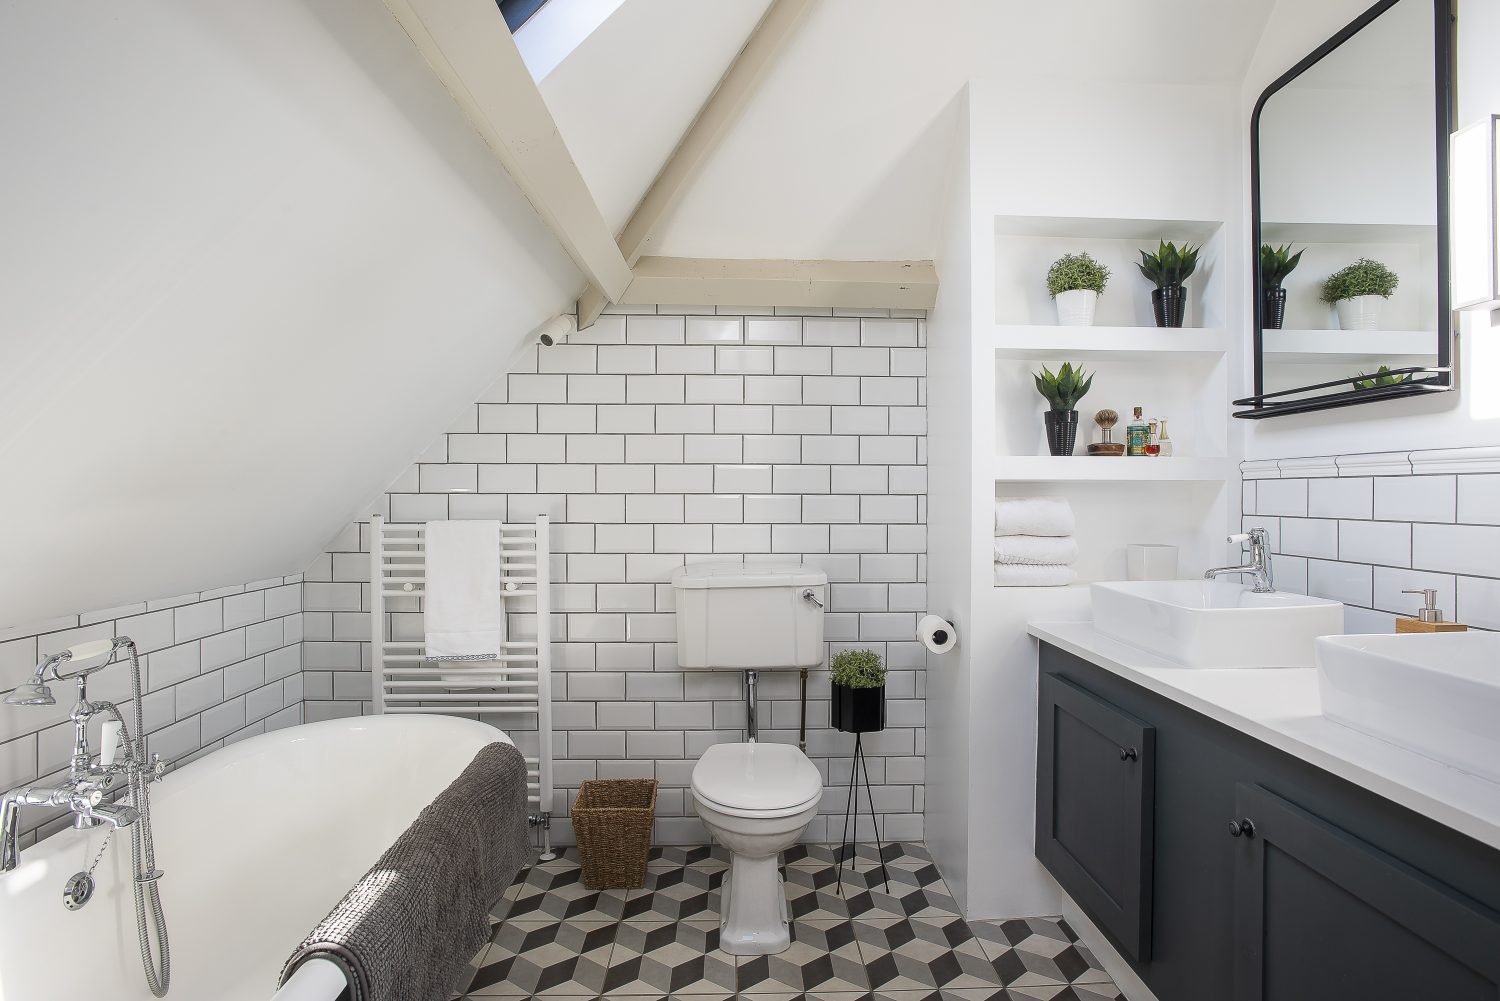 The master bathroom features beautiful geometric floor tiles that complement the matte black roll-top bath